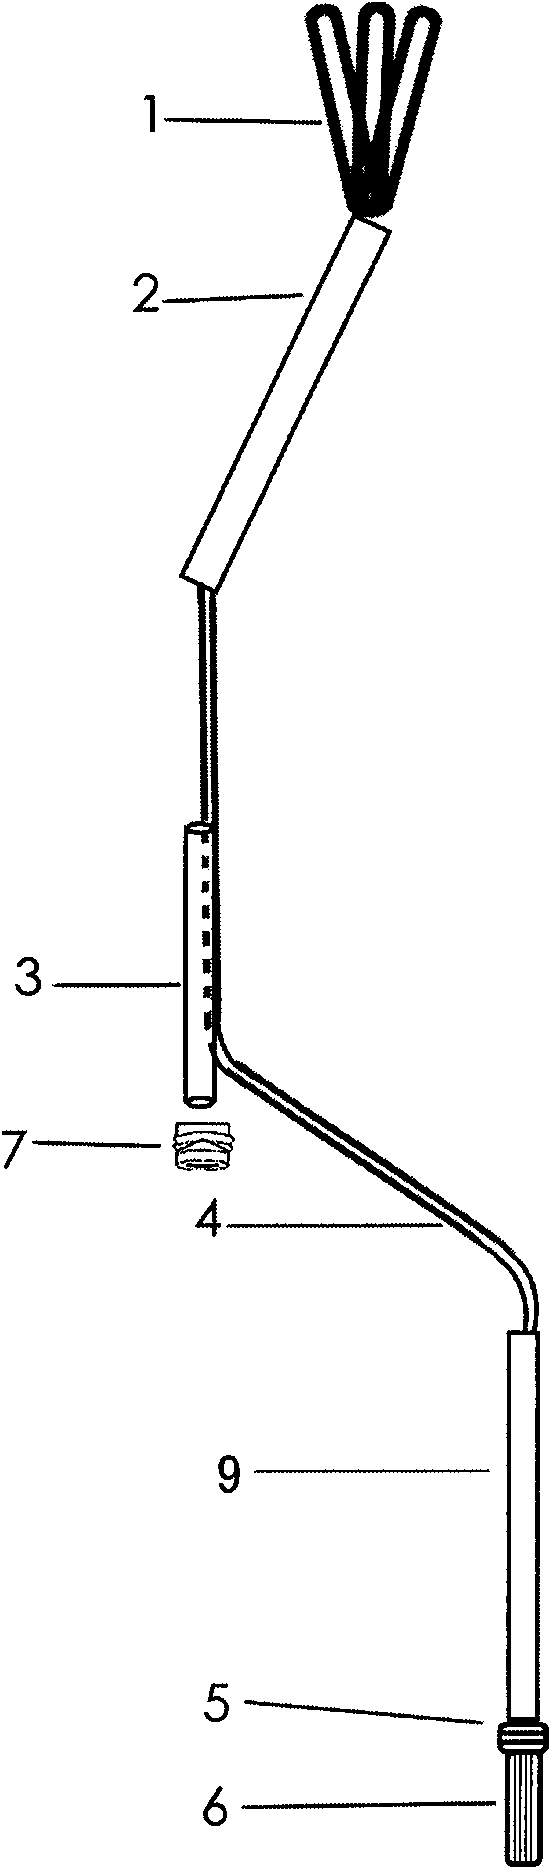 Three-vane fan-shaped forceps with passage for minimally invasive surgical operation